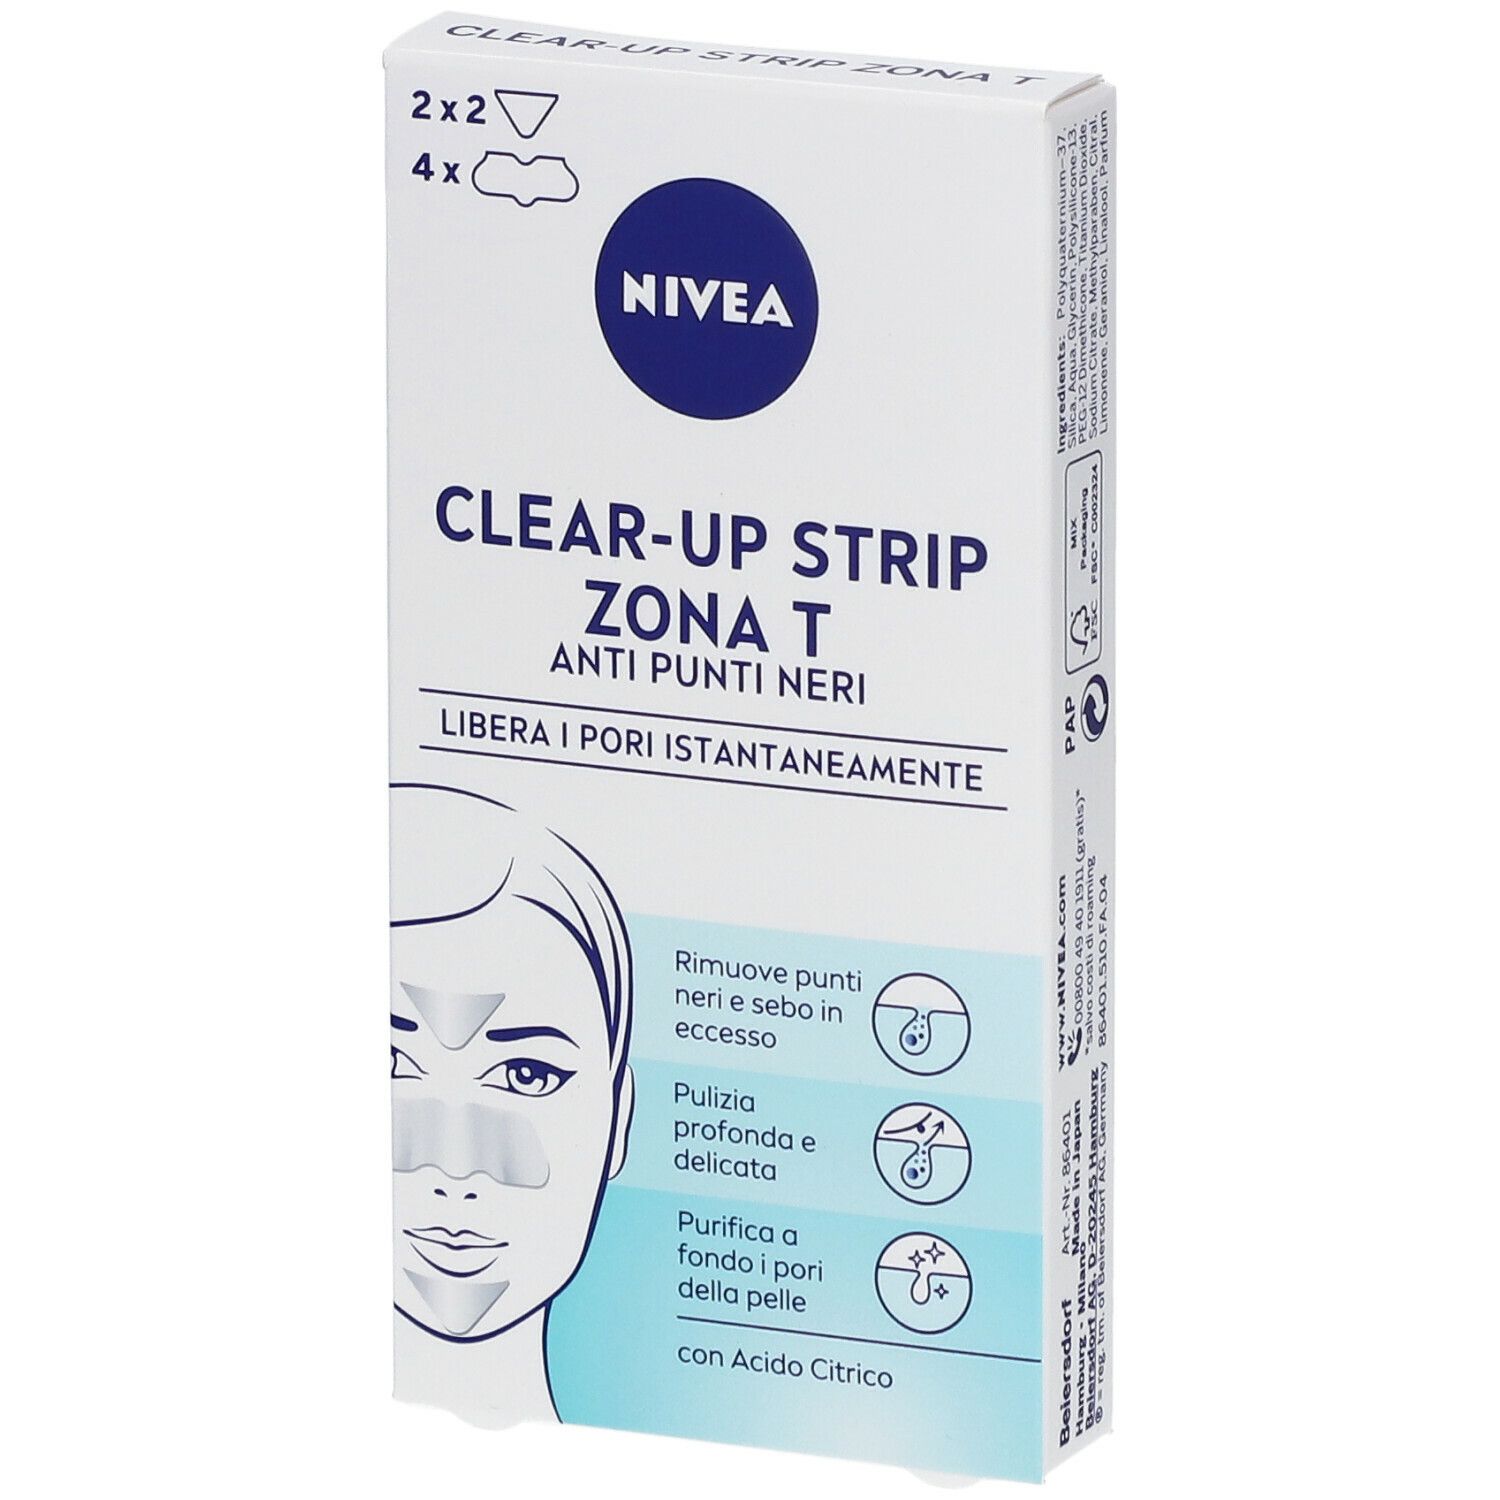 Image of Nivea Clear-Up Strip Zona T